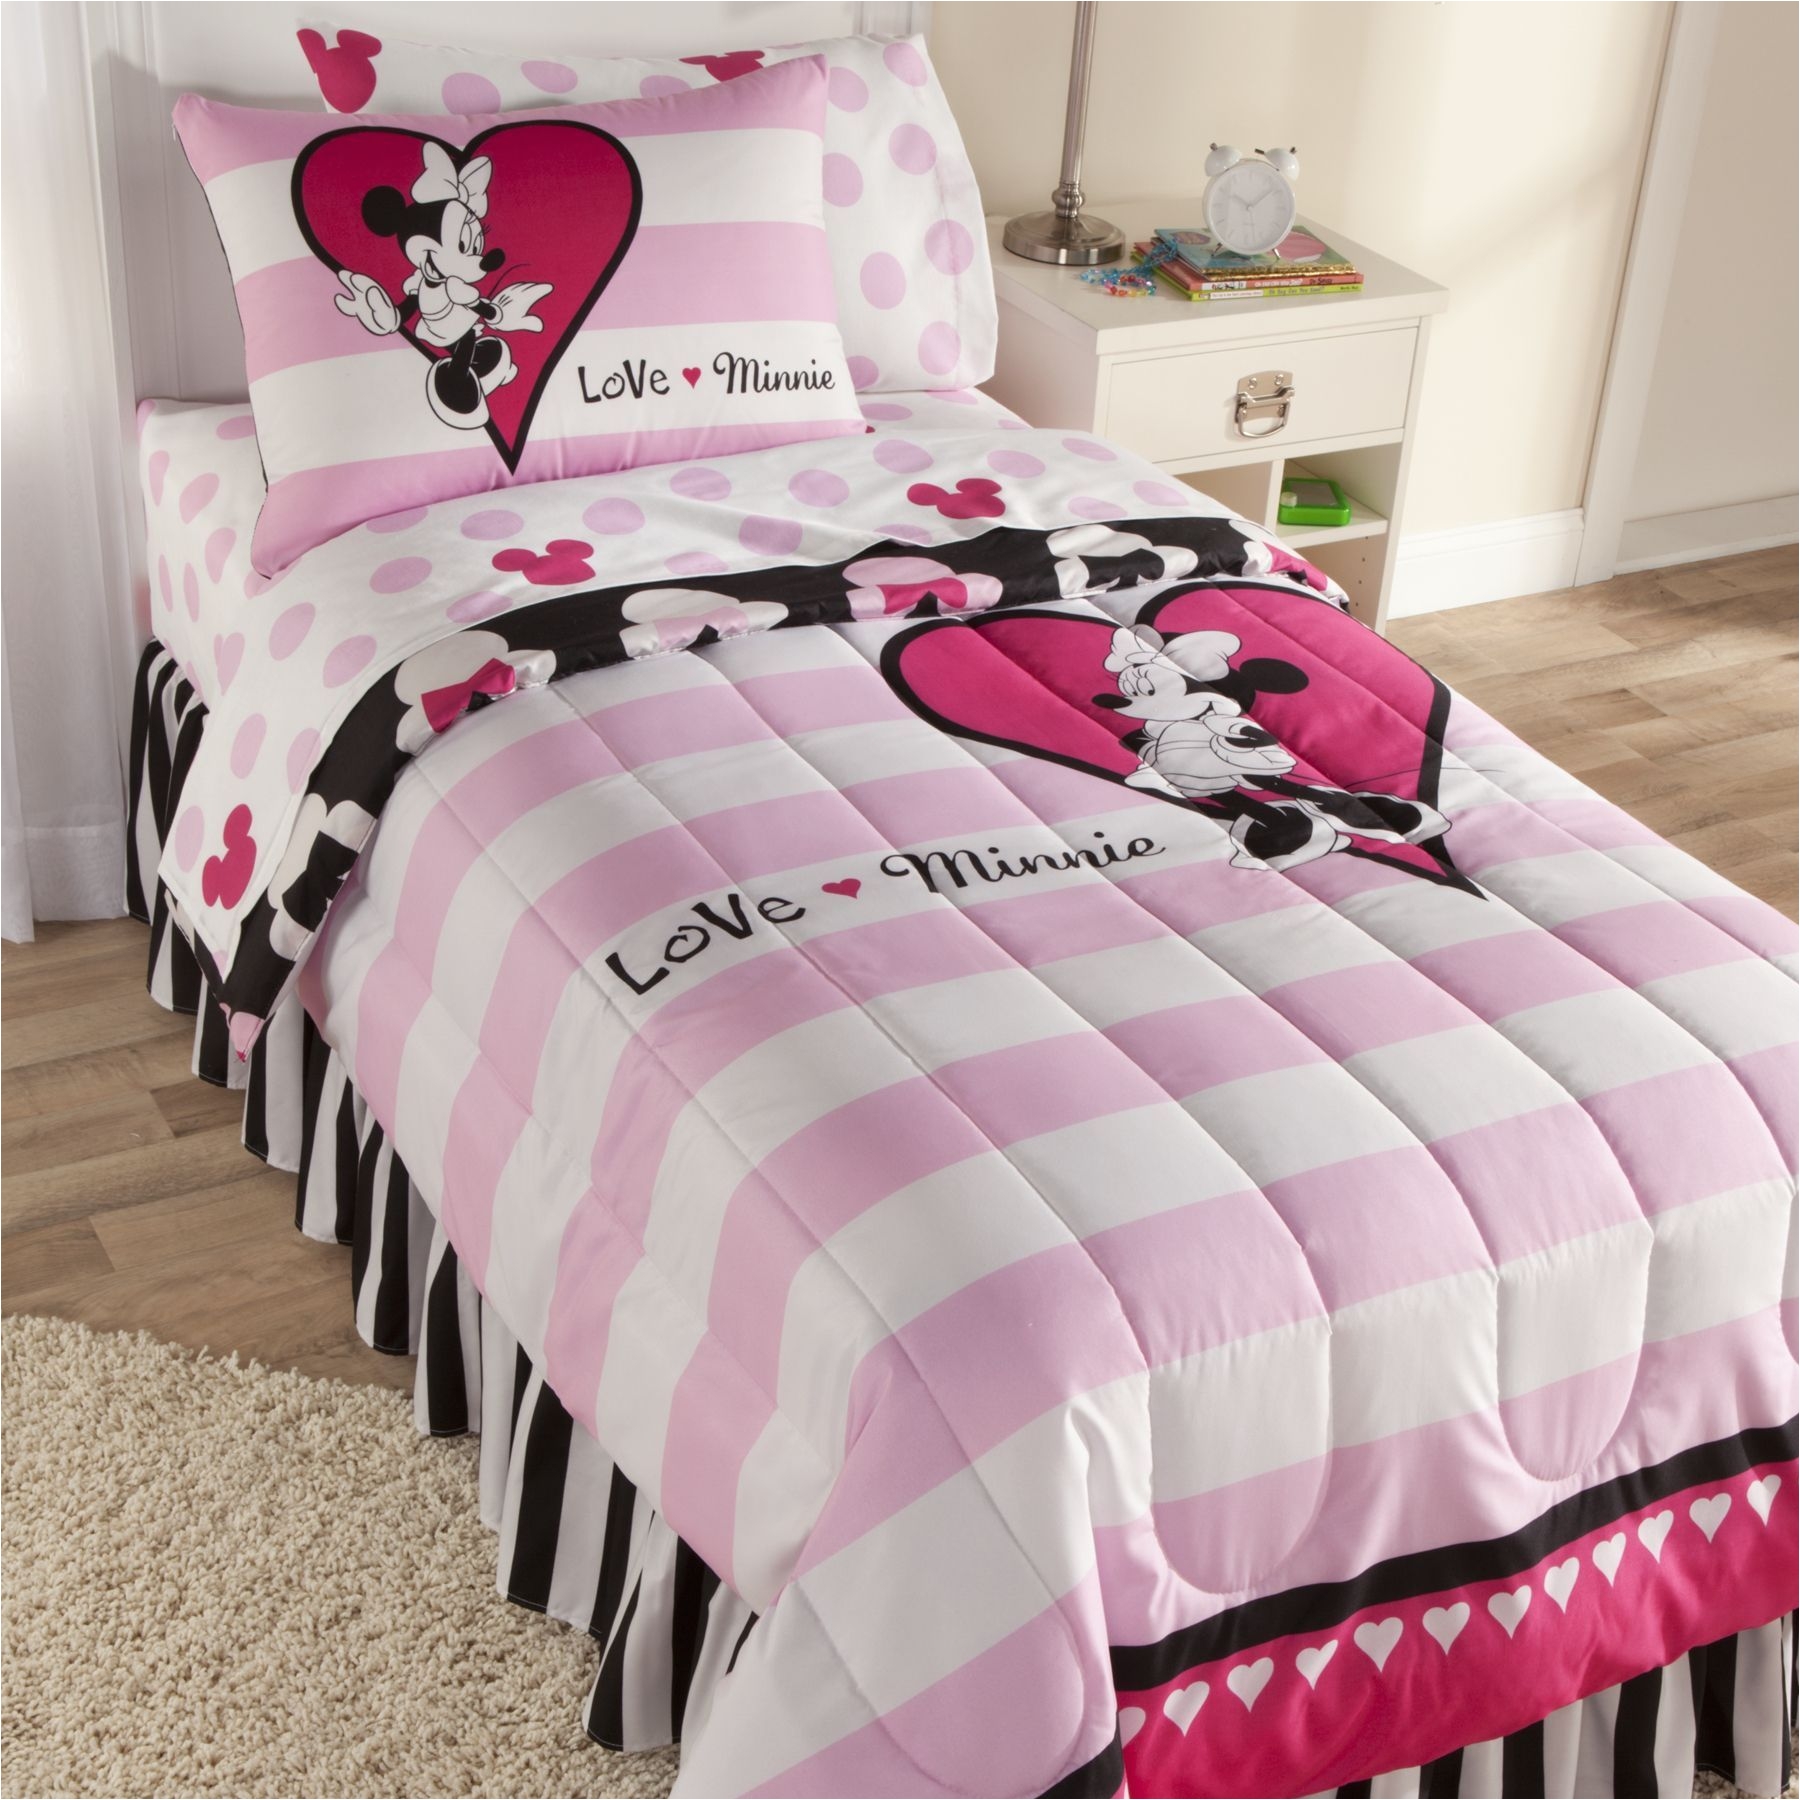 Minnie Mouse Bedroom Set for toddlers Decor Minnie Mouse Bedroom Decor Beds with Underneath Carpets and